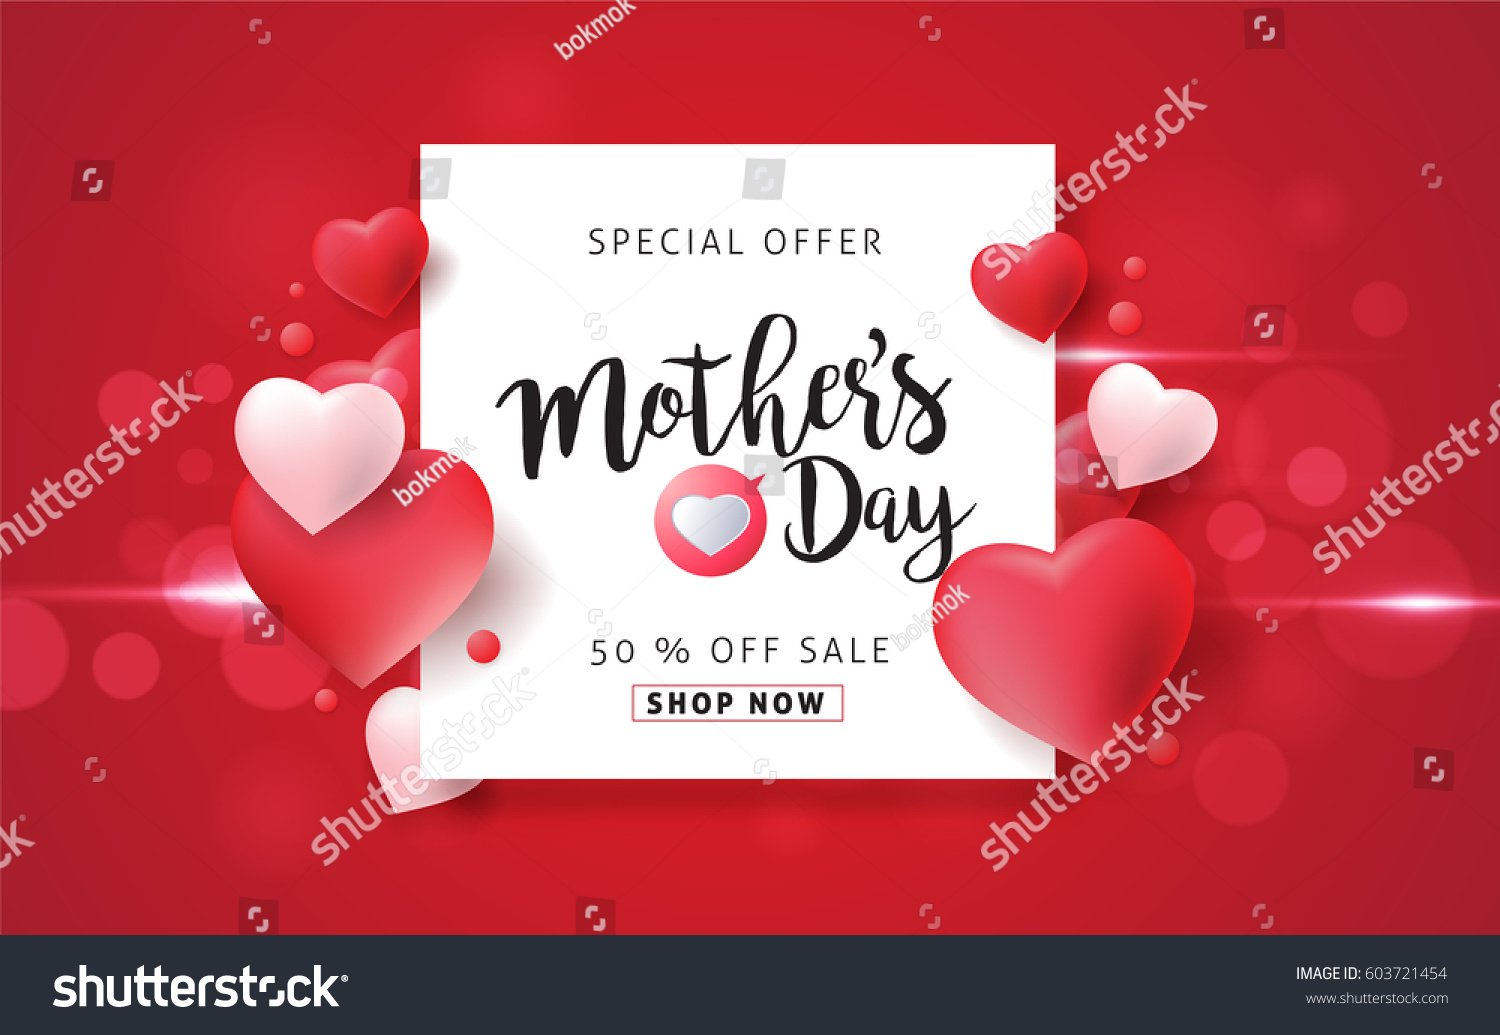 Mothers day sale background layout with Heart Shaped Balloons for banners,Wallpaper, flyers, invitation, posters, brochure, voucher discount.Vector illustration template. #603721454